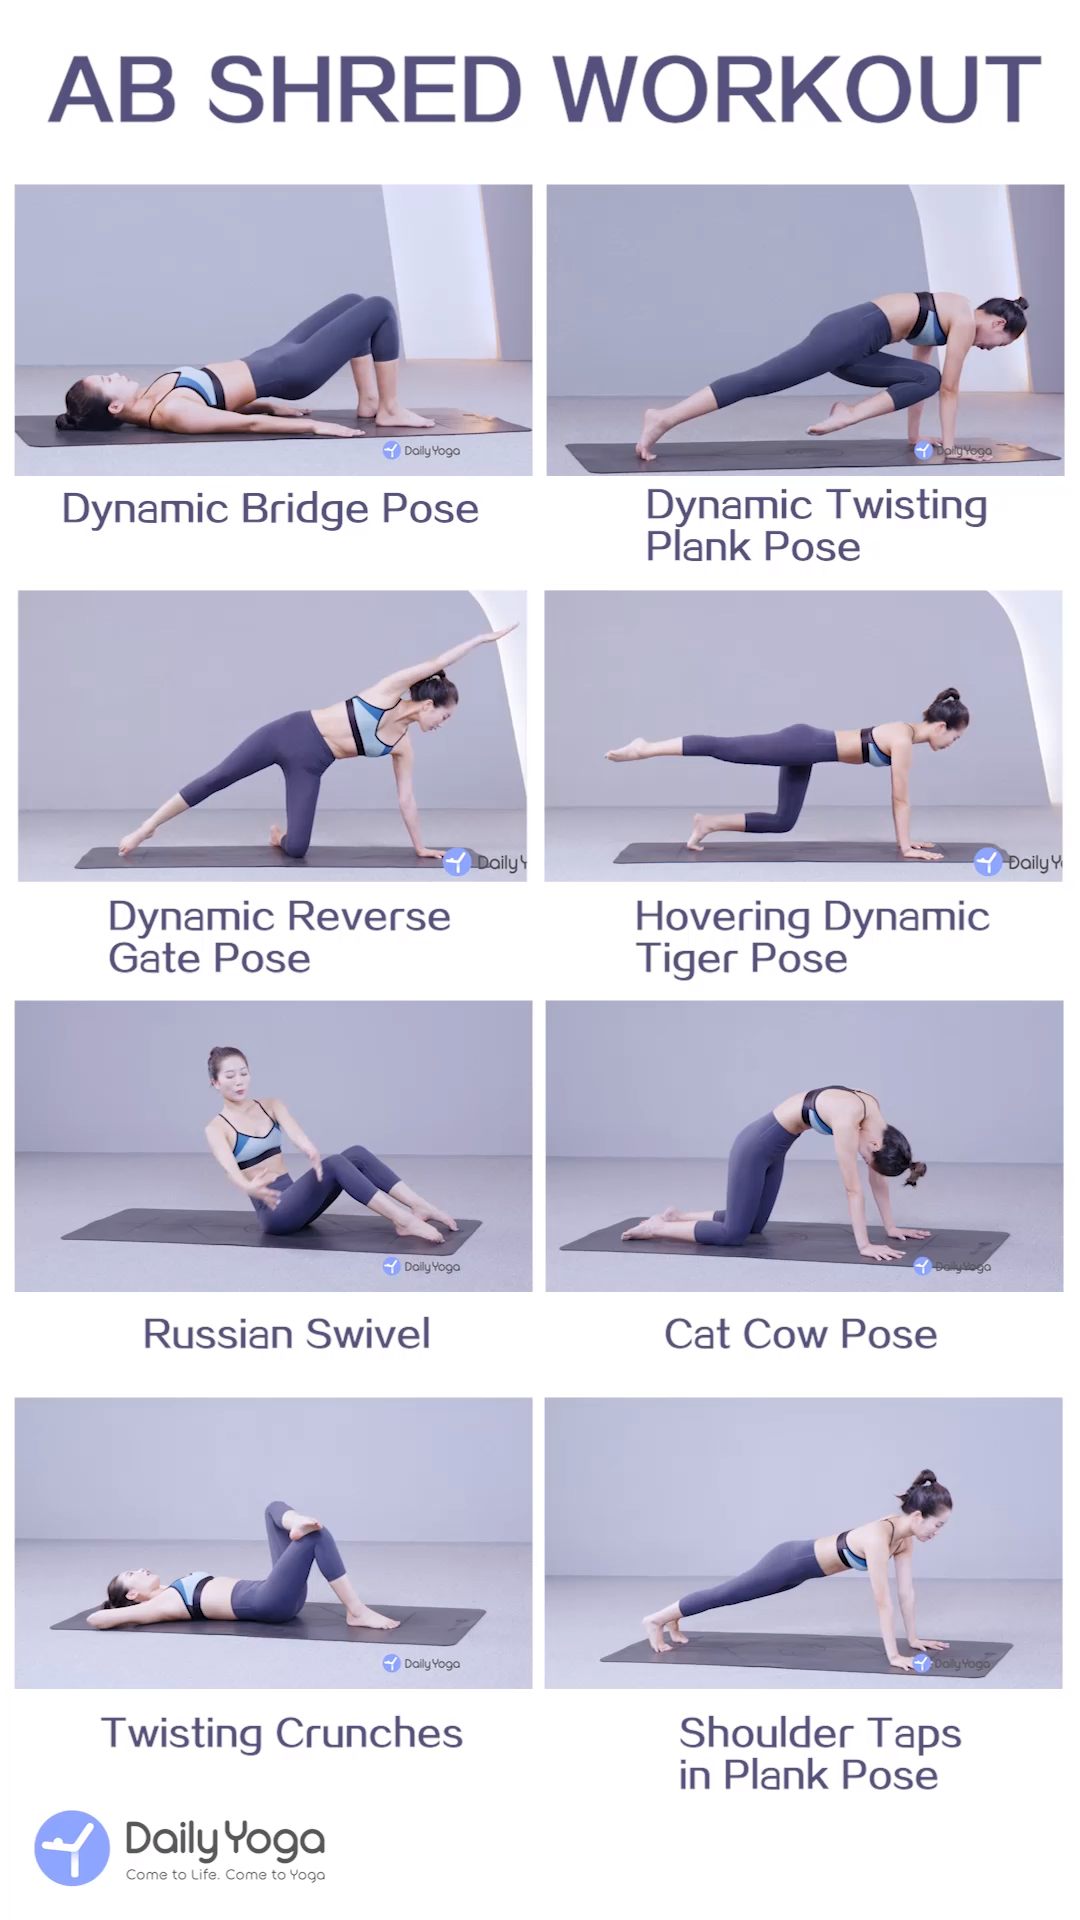 DailyYogaApp|Ab Shred Workouts - DailyYogaApp|Ab Shred Workouts -   16 fitness Training metabolism ideas